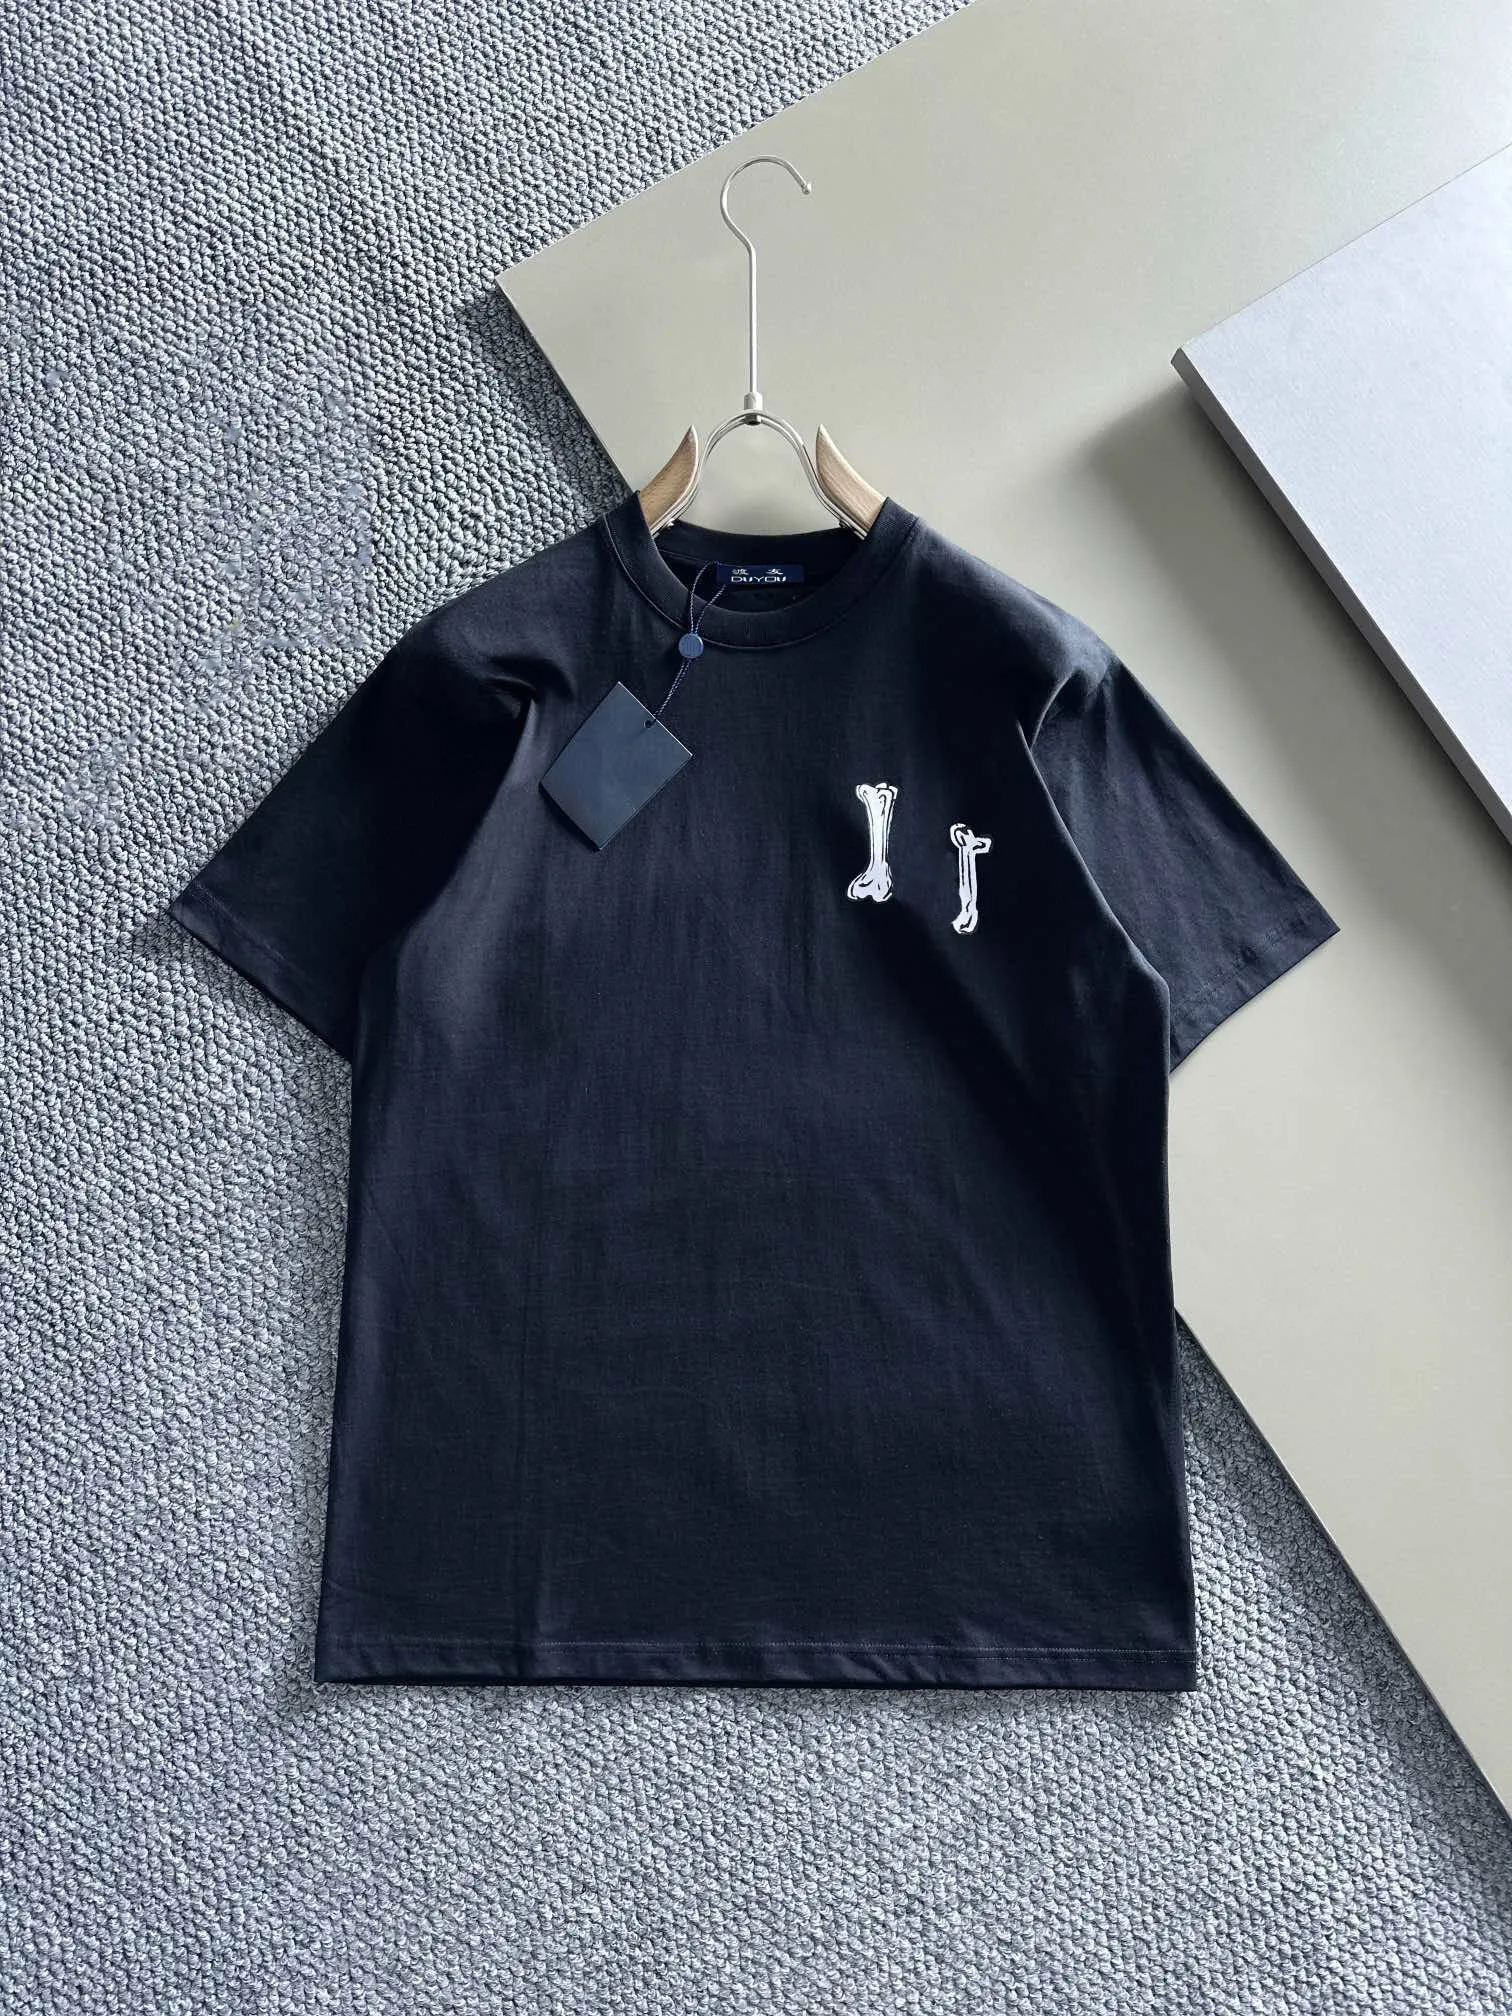 DUYOU Oversize T shirt with Vintage Jersey Wash Letters 100% Cotton T-Shirt Men Casuals Basic T-shirts Women Quality Classical Tops DY8987